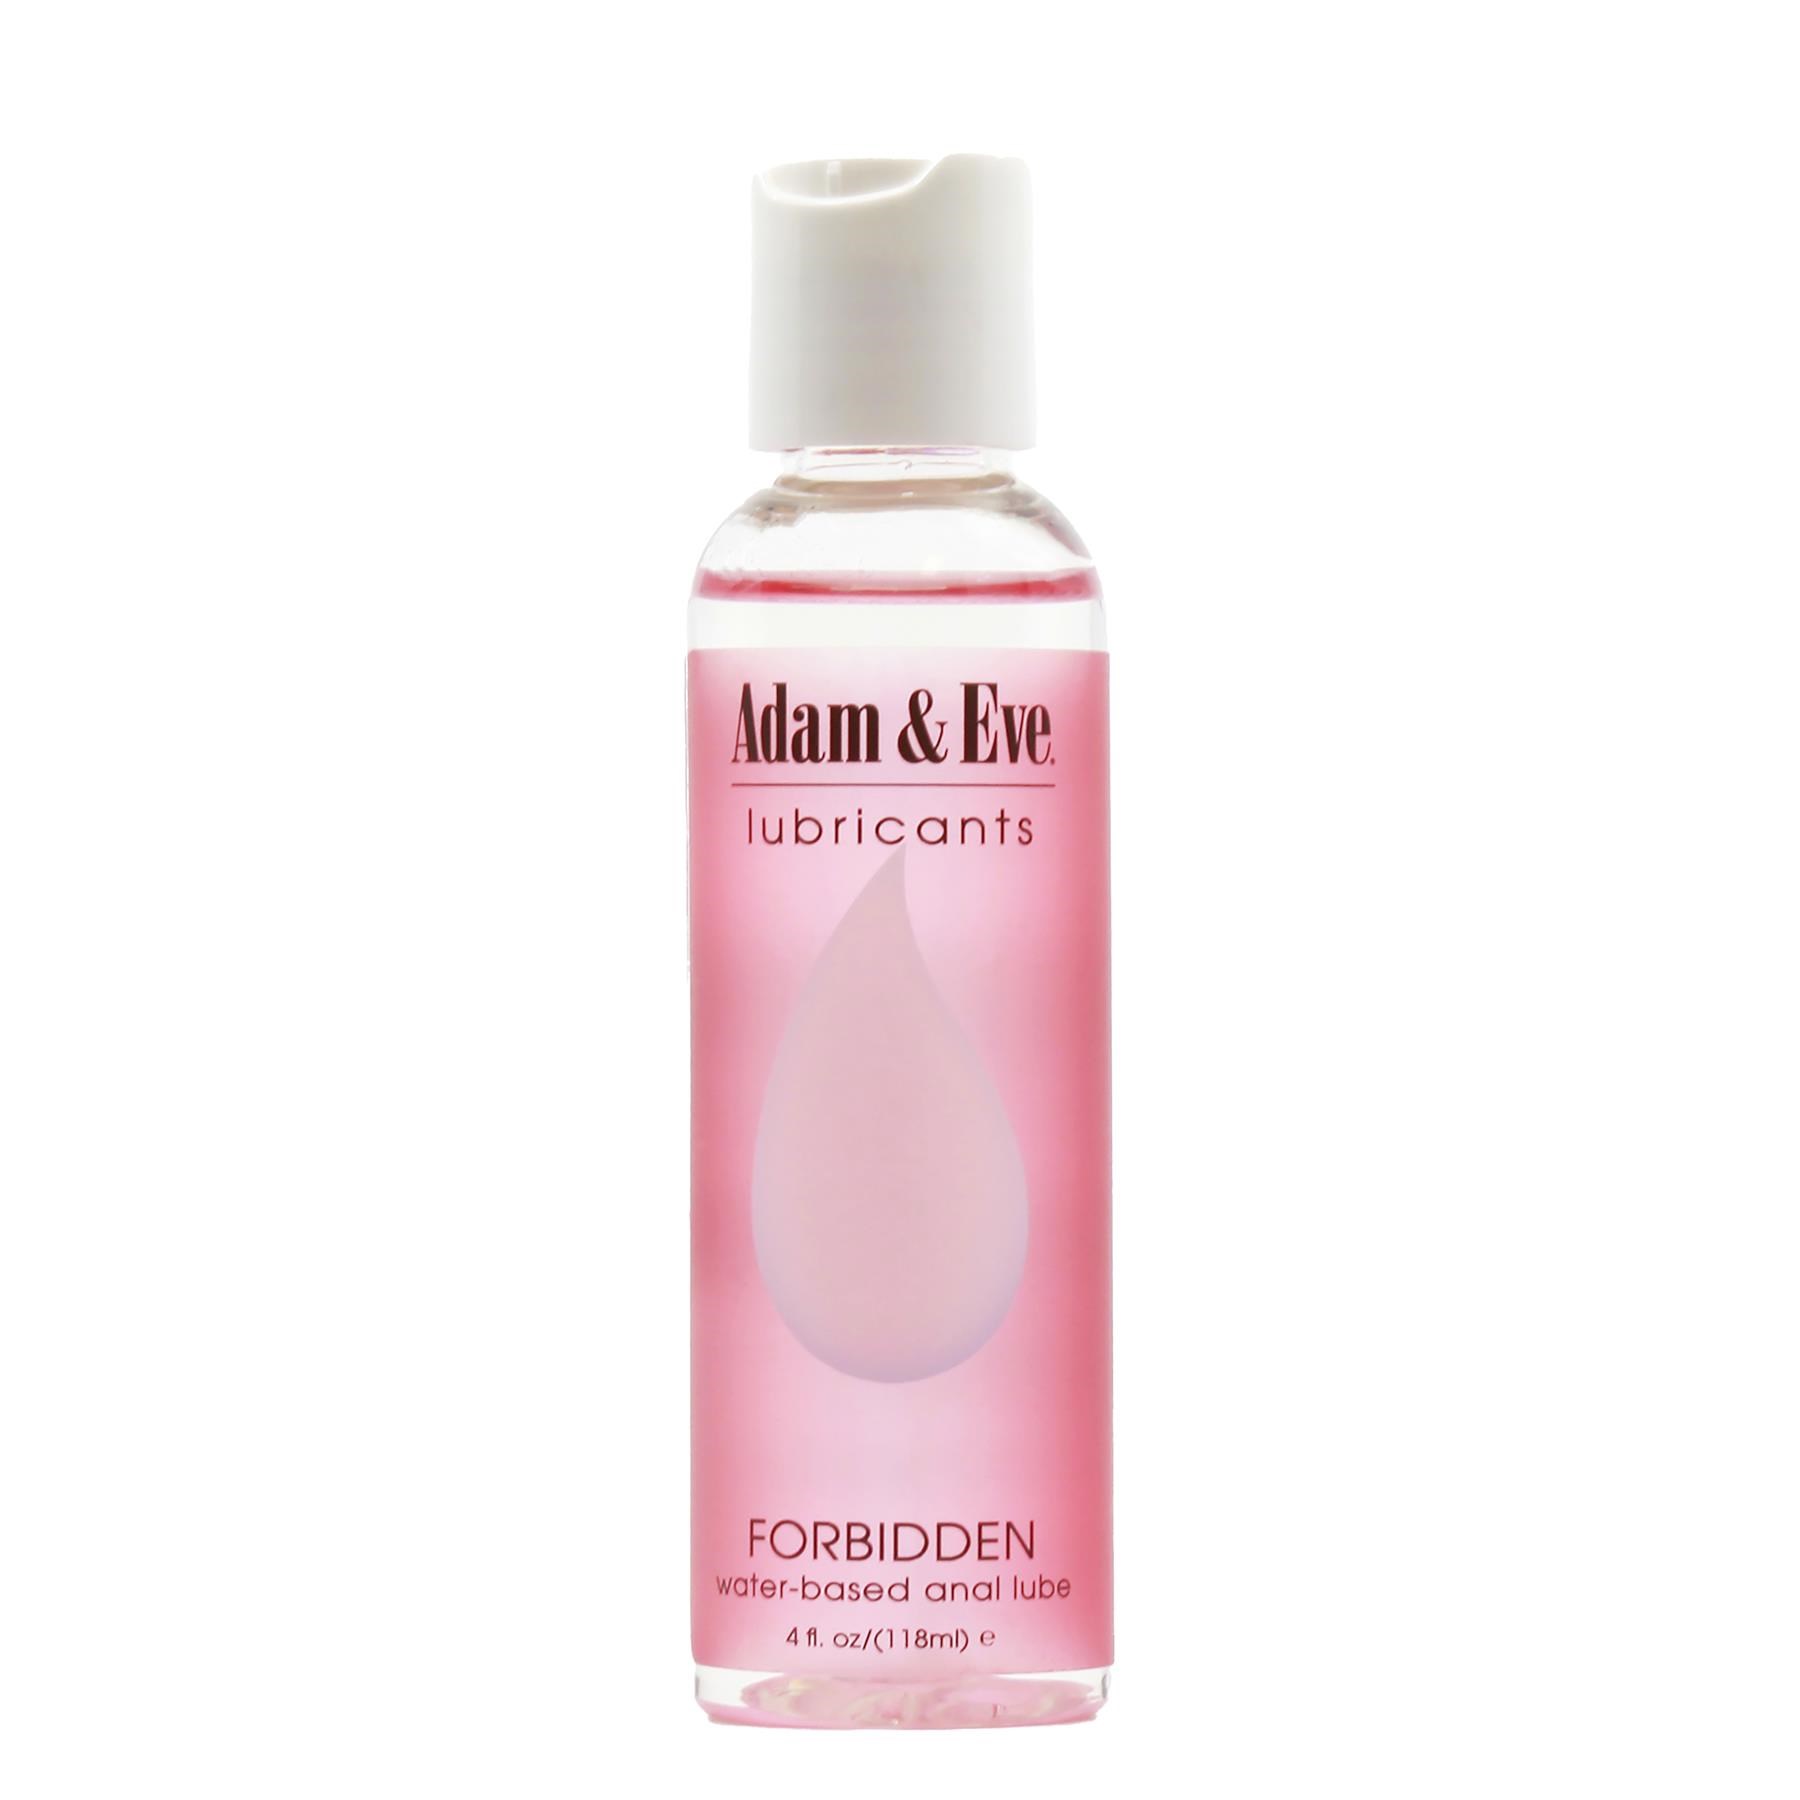 Adam & Eve Forbidden Anal Lubricant 4 oz front of bottle